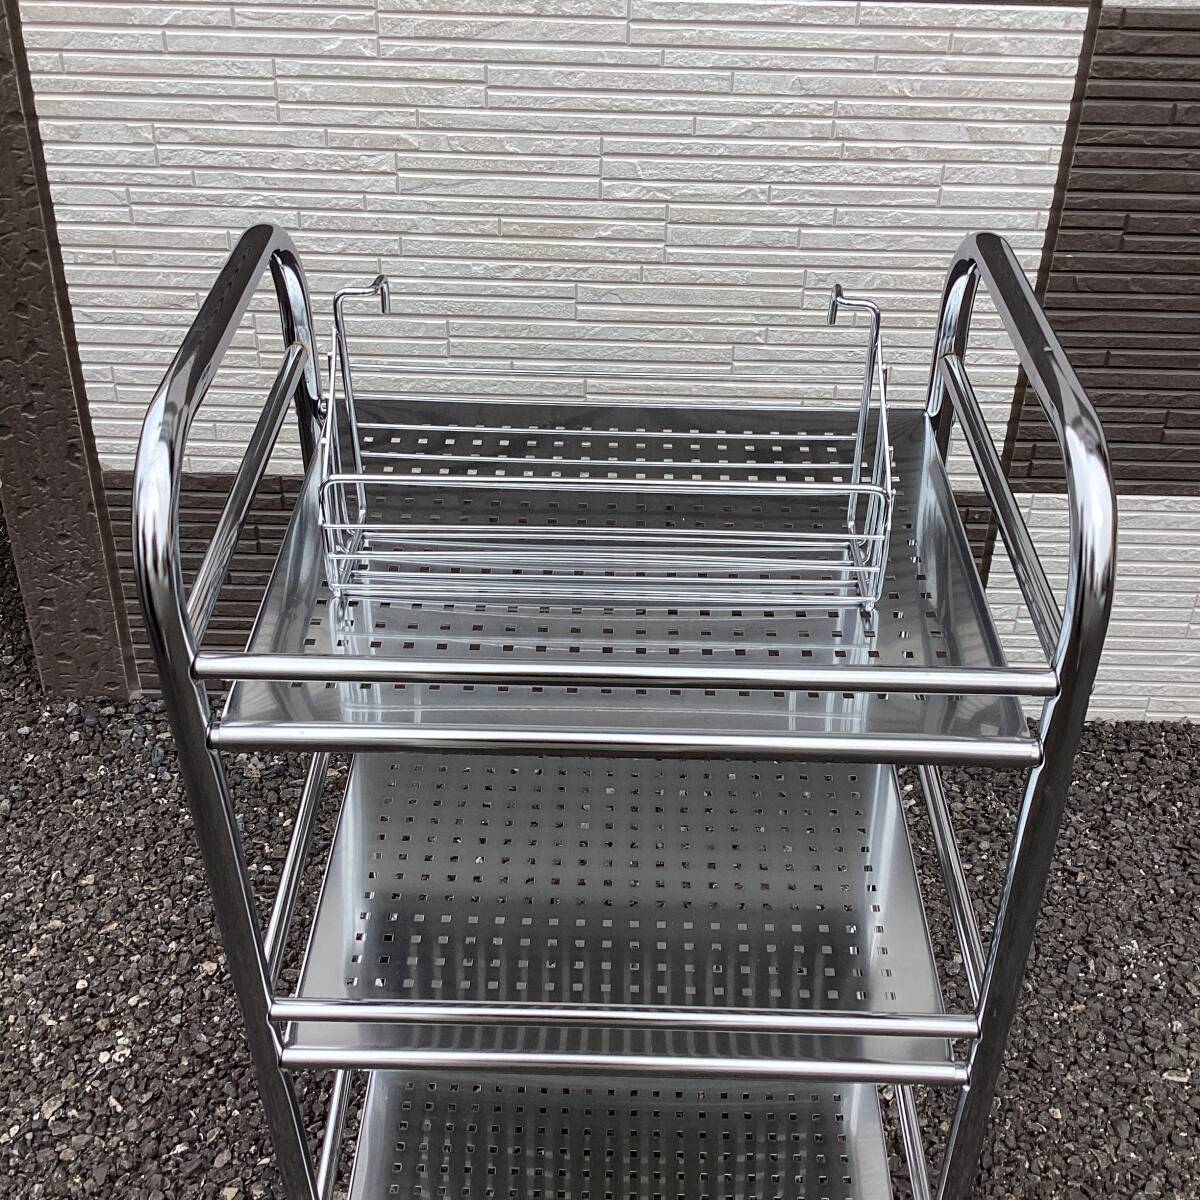  made of stainless steel 3 step rack .... rack extra attaching 